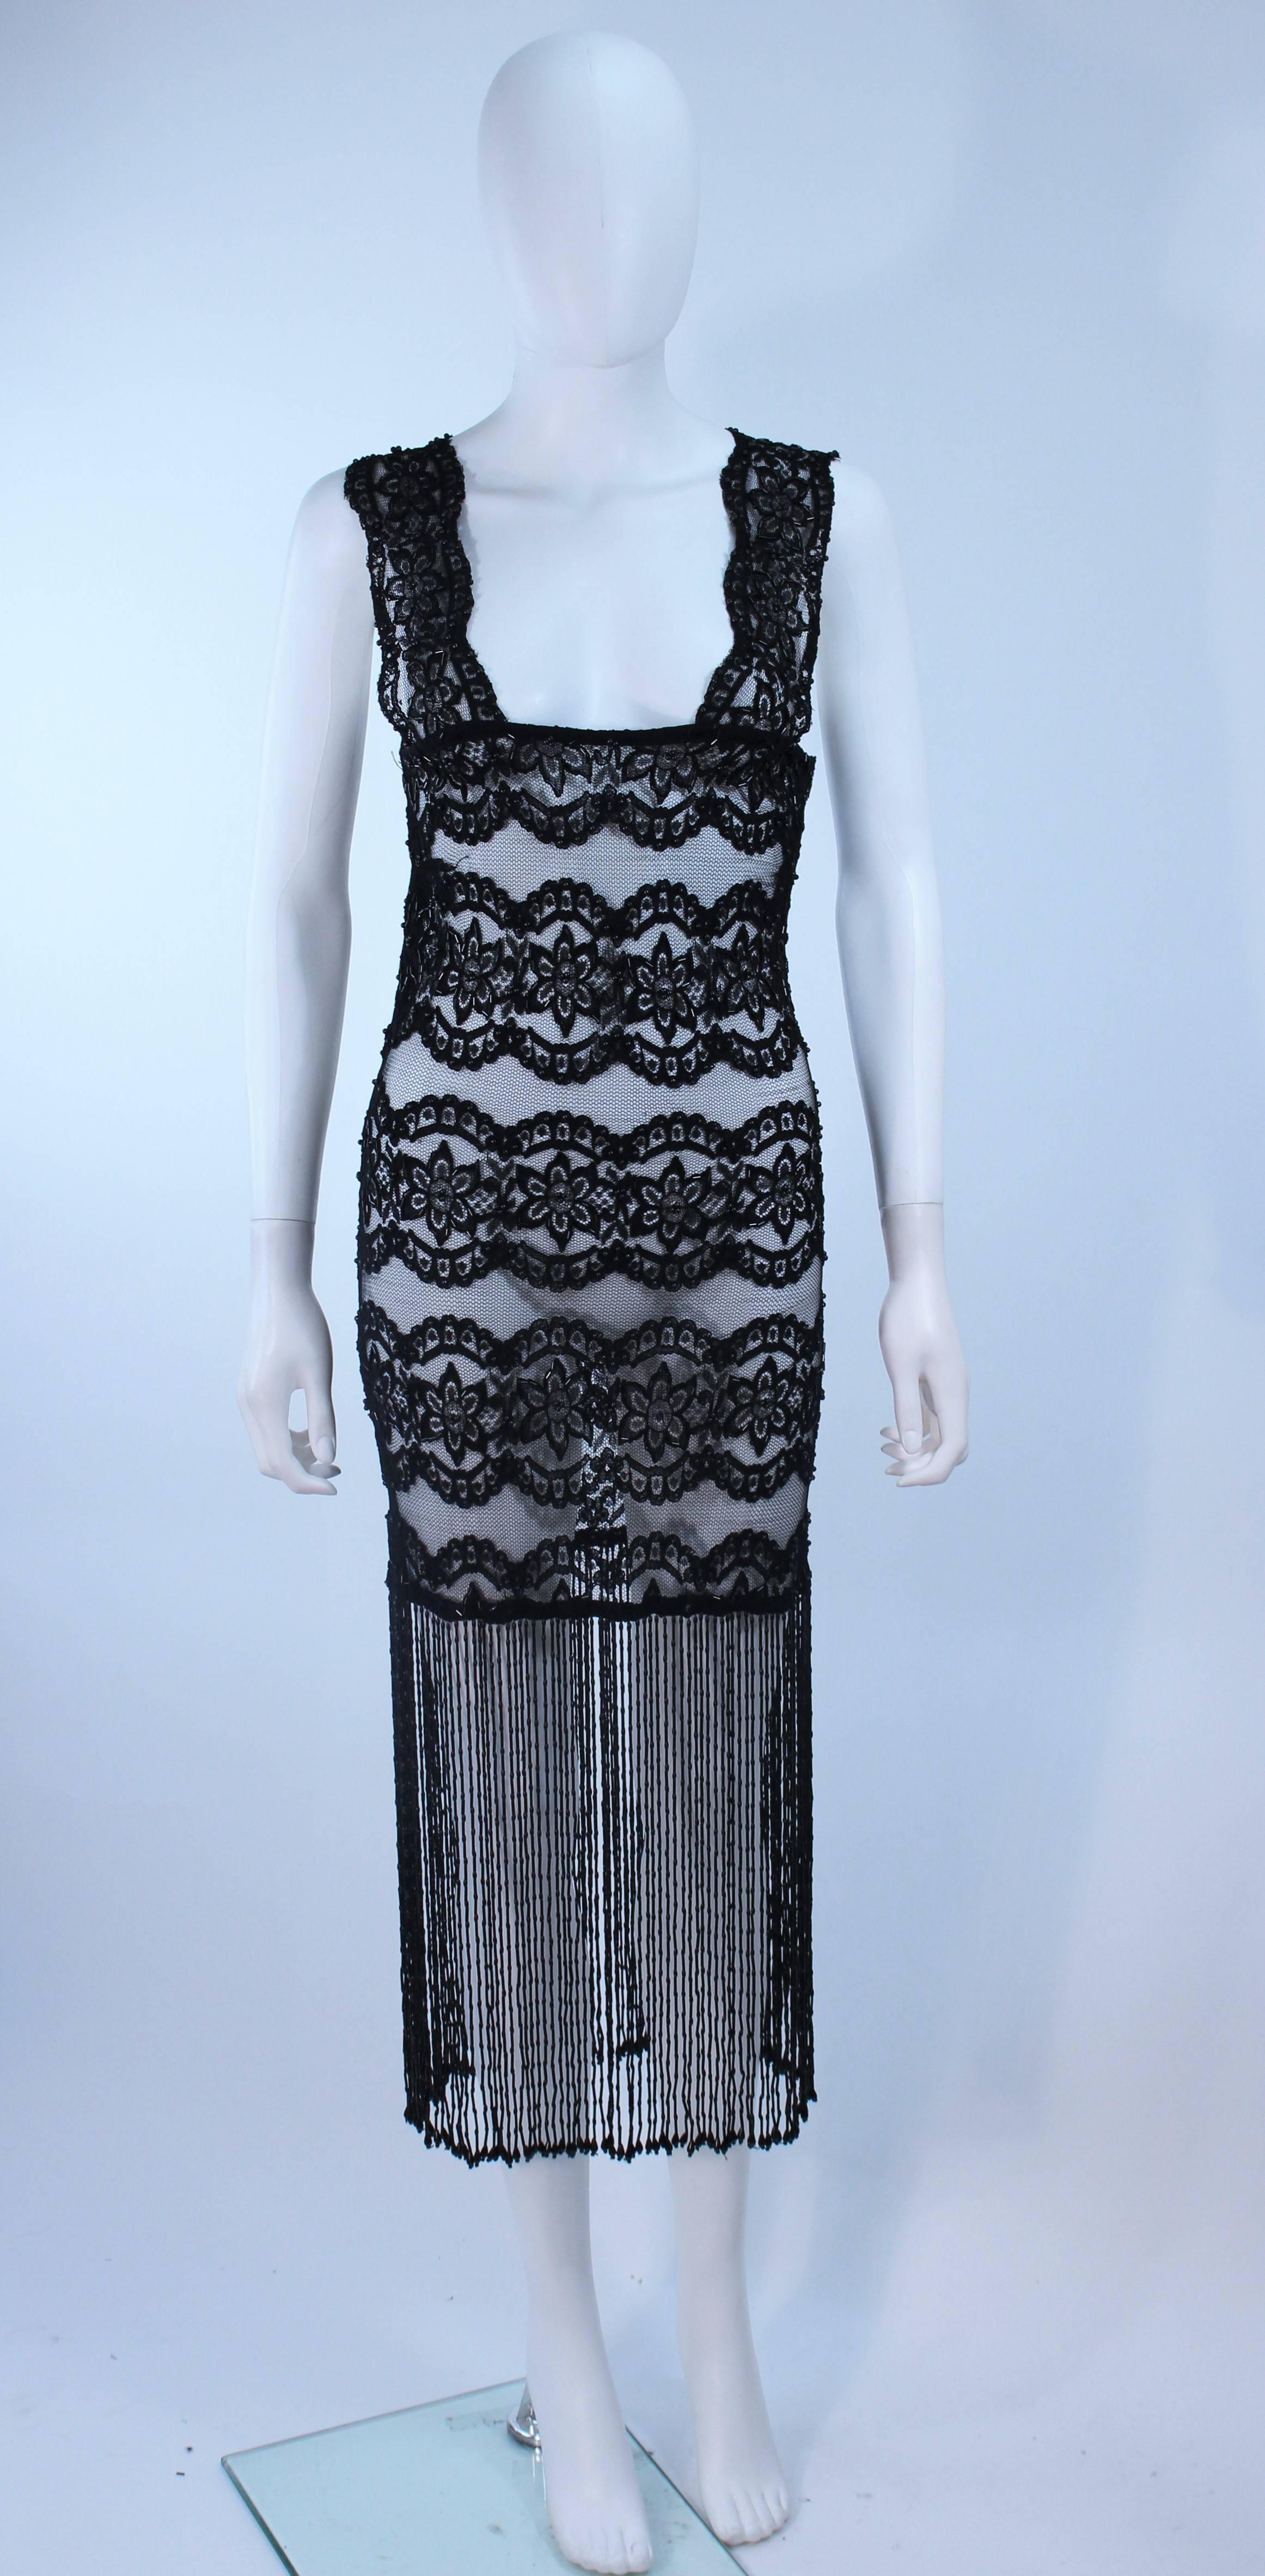  This custom made dress is composed of a stretch black lace with a long fringe hem trim. Features a zipper closure. In great vintage condition.

  **Please cross-reference measurements for personal accuracy. Size in description box is an